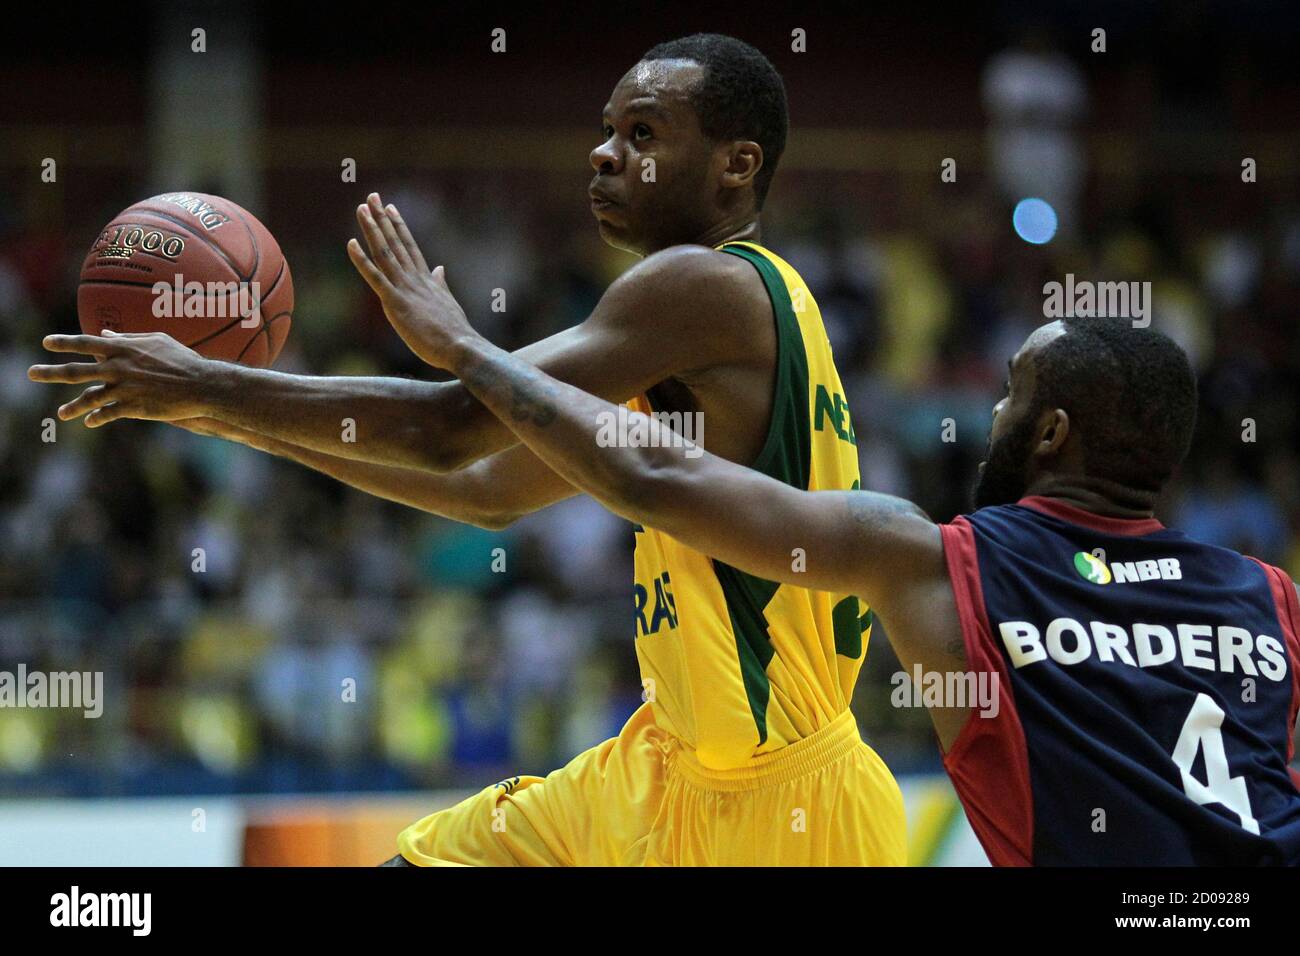 Nezinho (back) of NBB Brazil fights for the ball with Mark Antonio Borders  of NBB World during the Novo Basquete Brasil (NBB) All-Star basketball game  at Nilson Nelson gym in Brasilia March